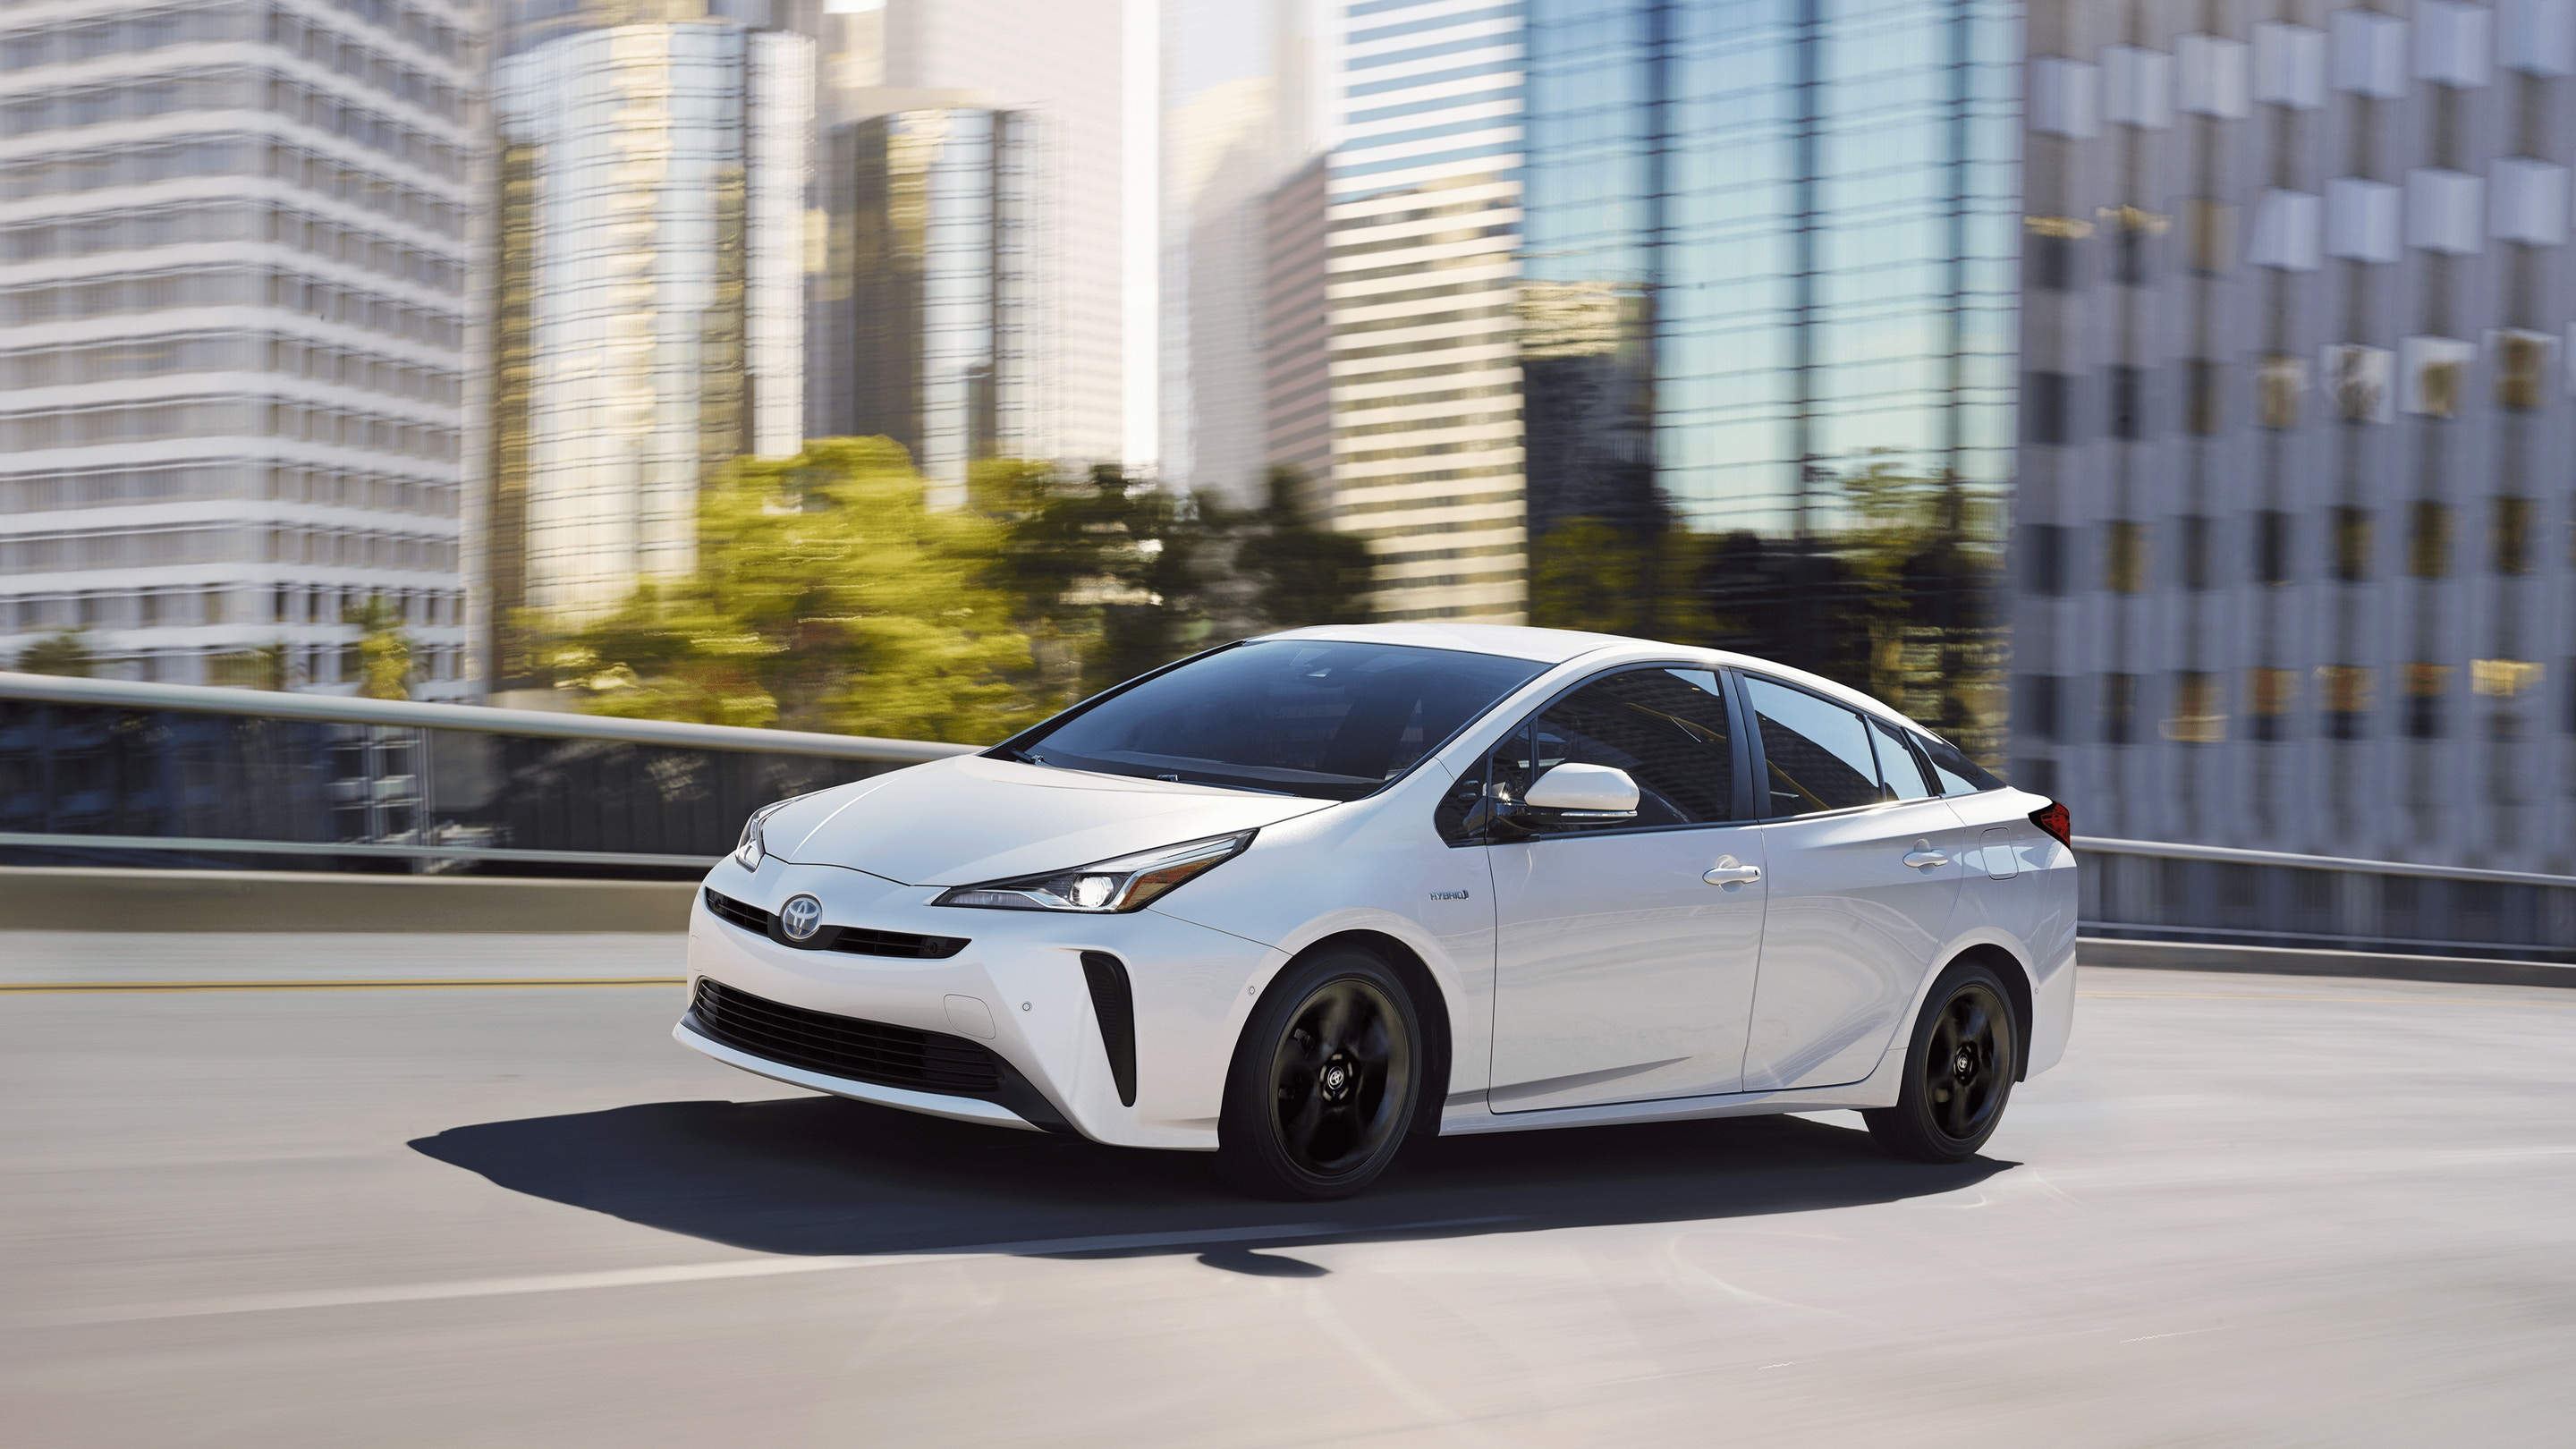 image of a Toyota Prius